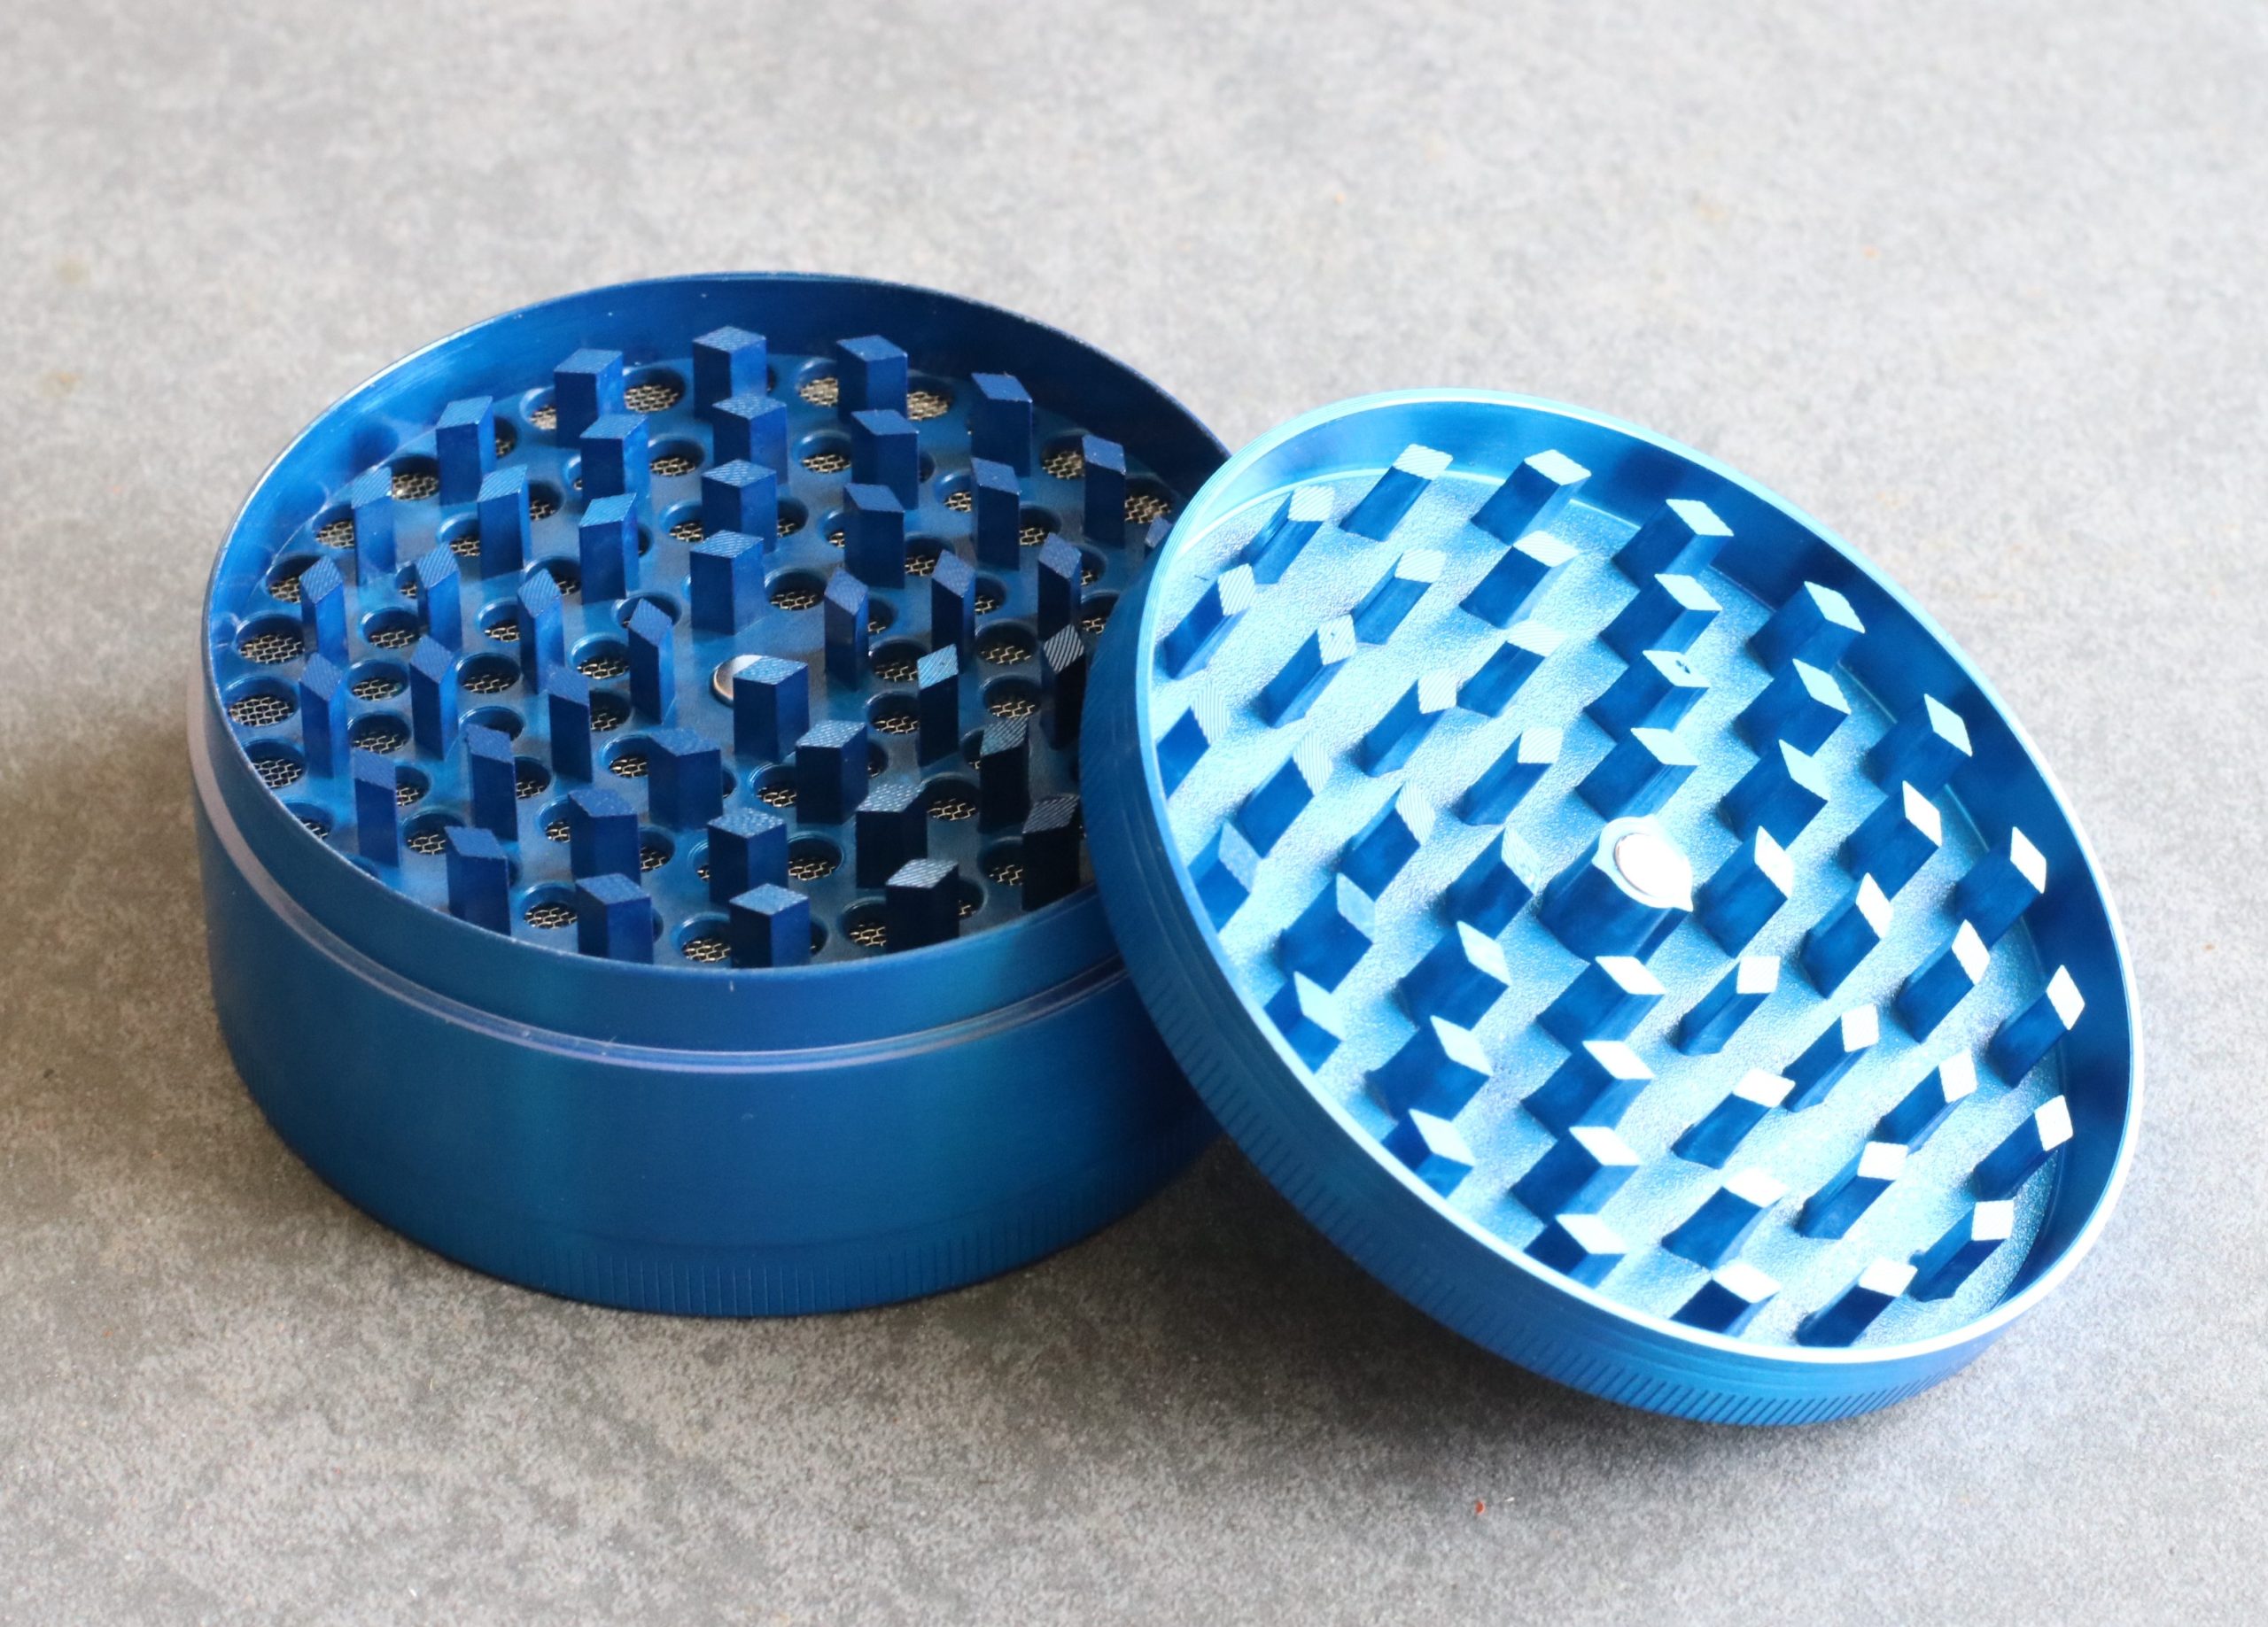 3 Piece Assorted Magnetic Plastic Grinders for Weed